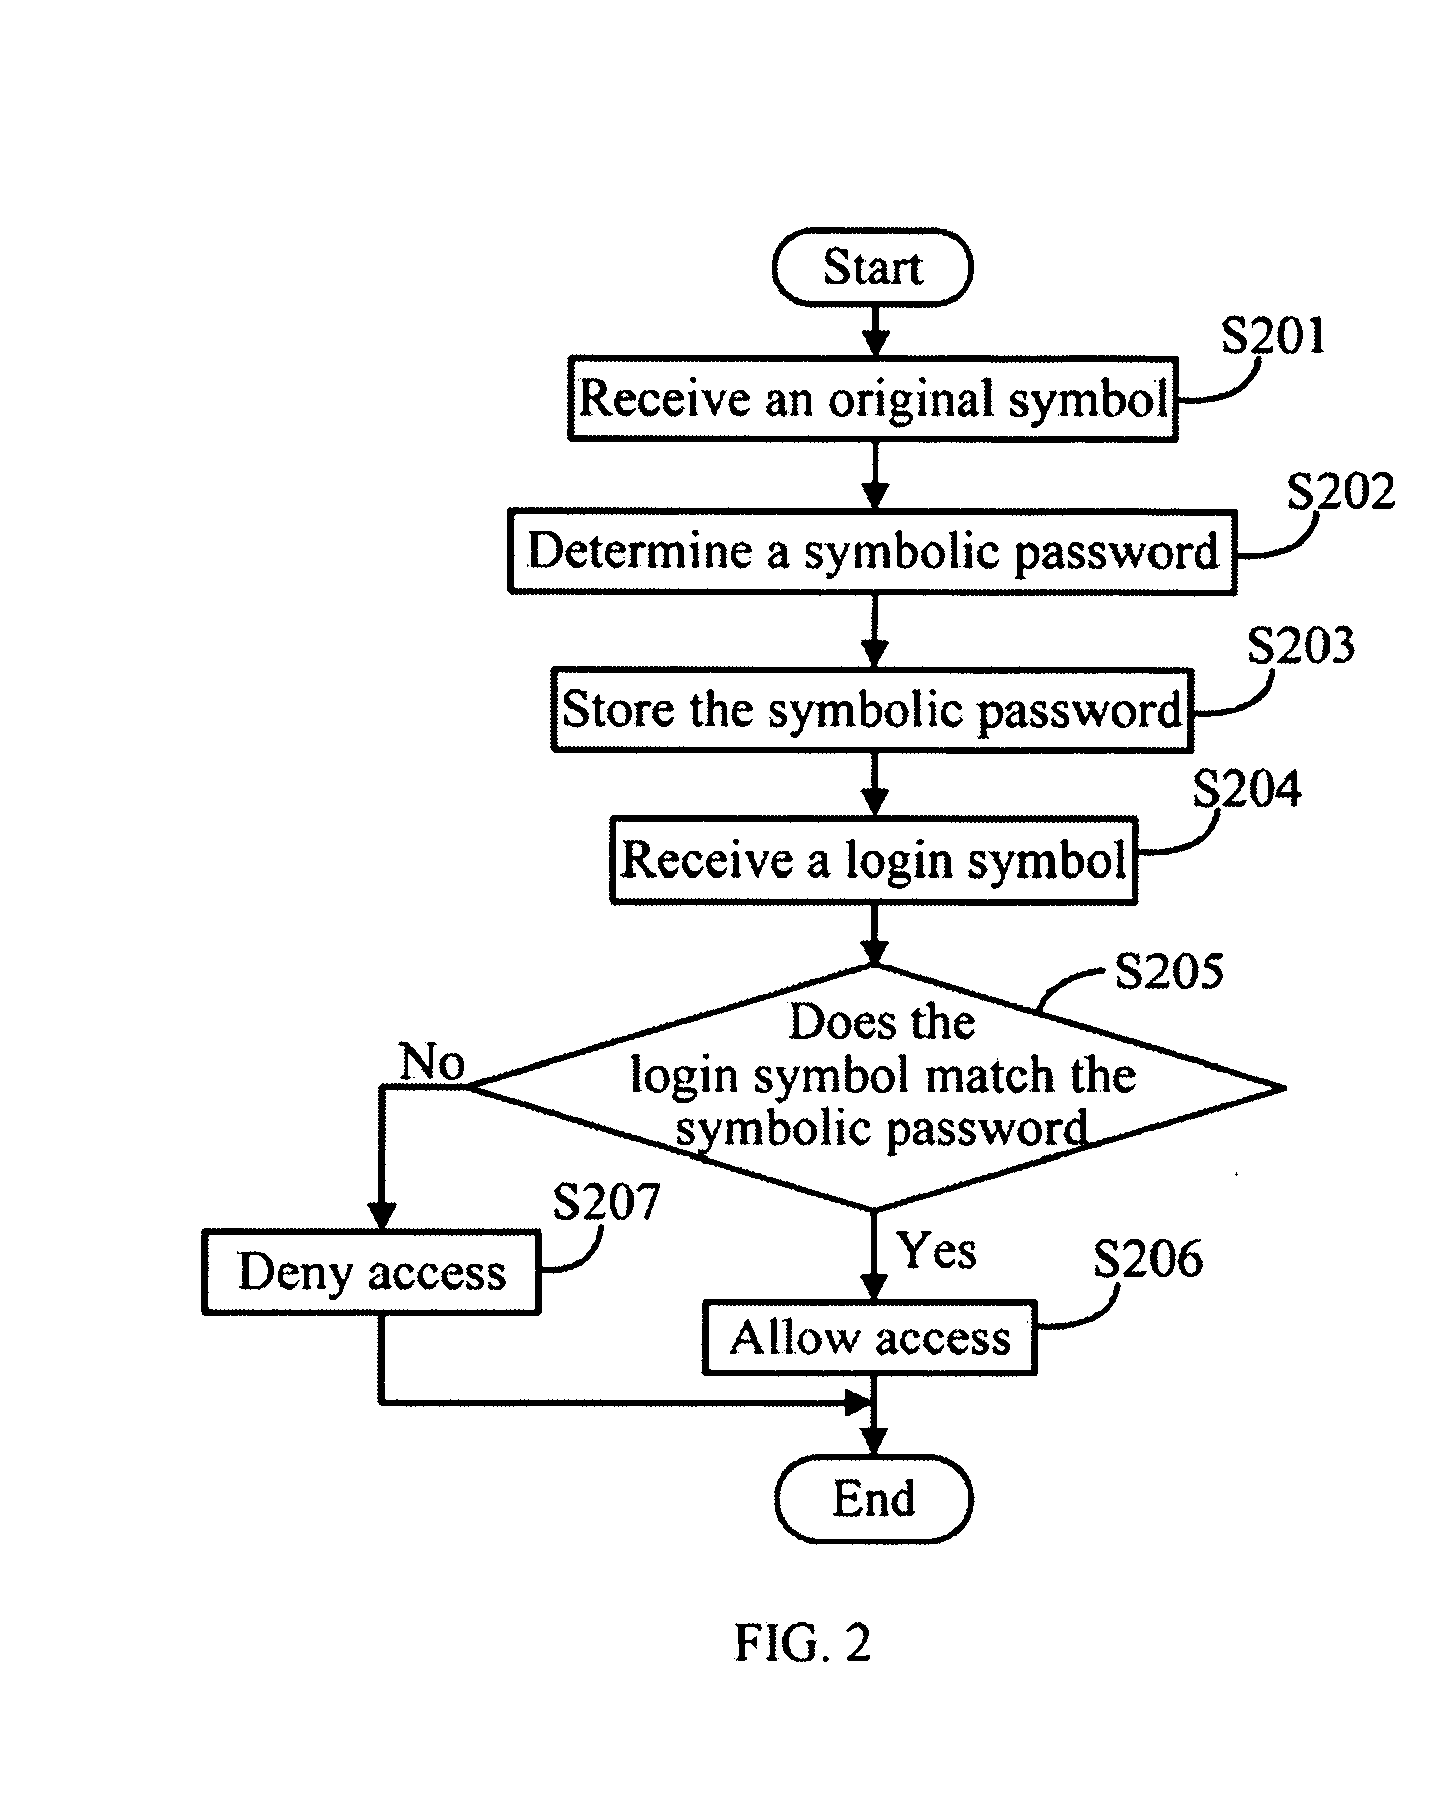 Electronic device and method for verifying user identification